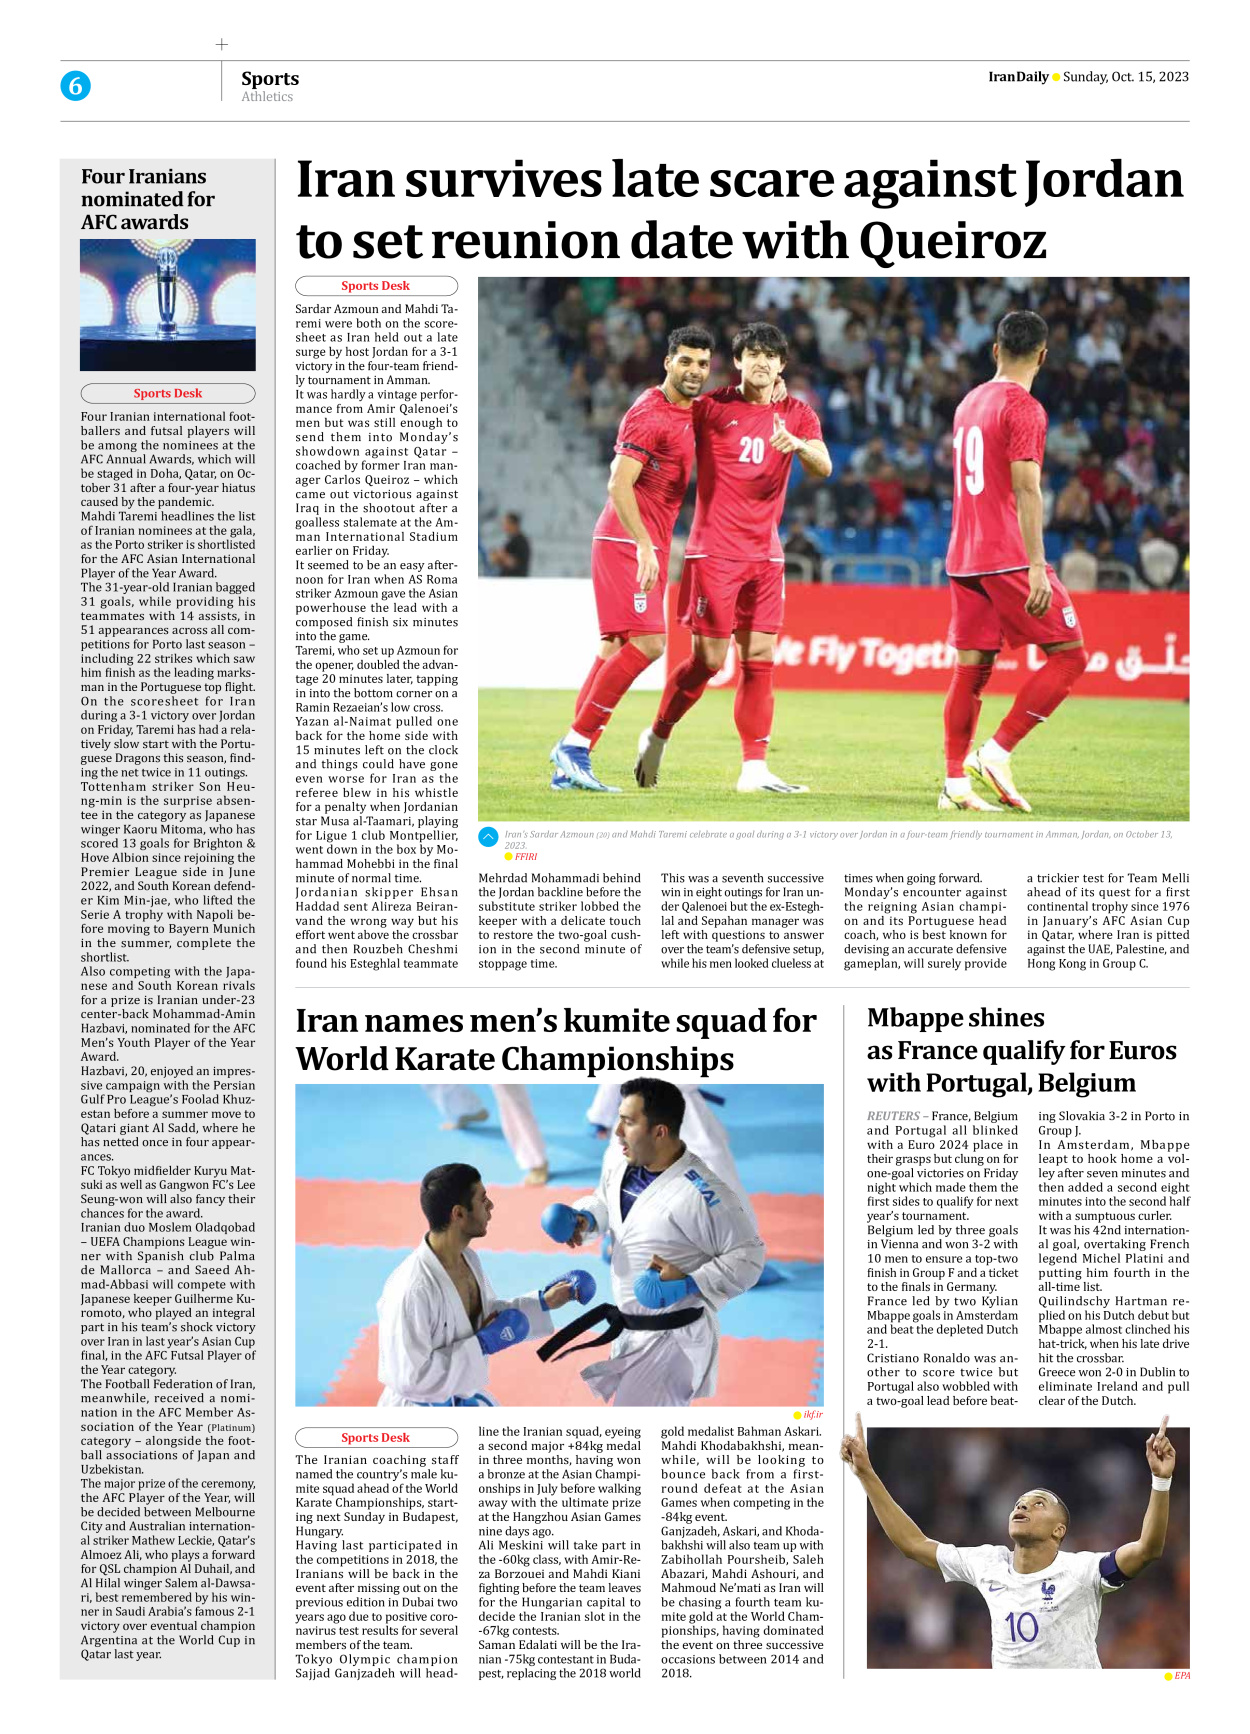 Iran Daily - Number Seven Thousand Four Hundred and Eight - 15 October 2023 - Page 6